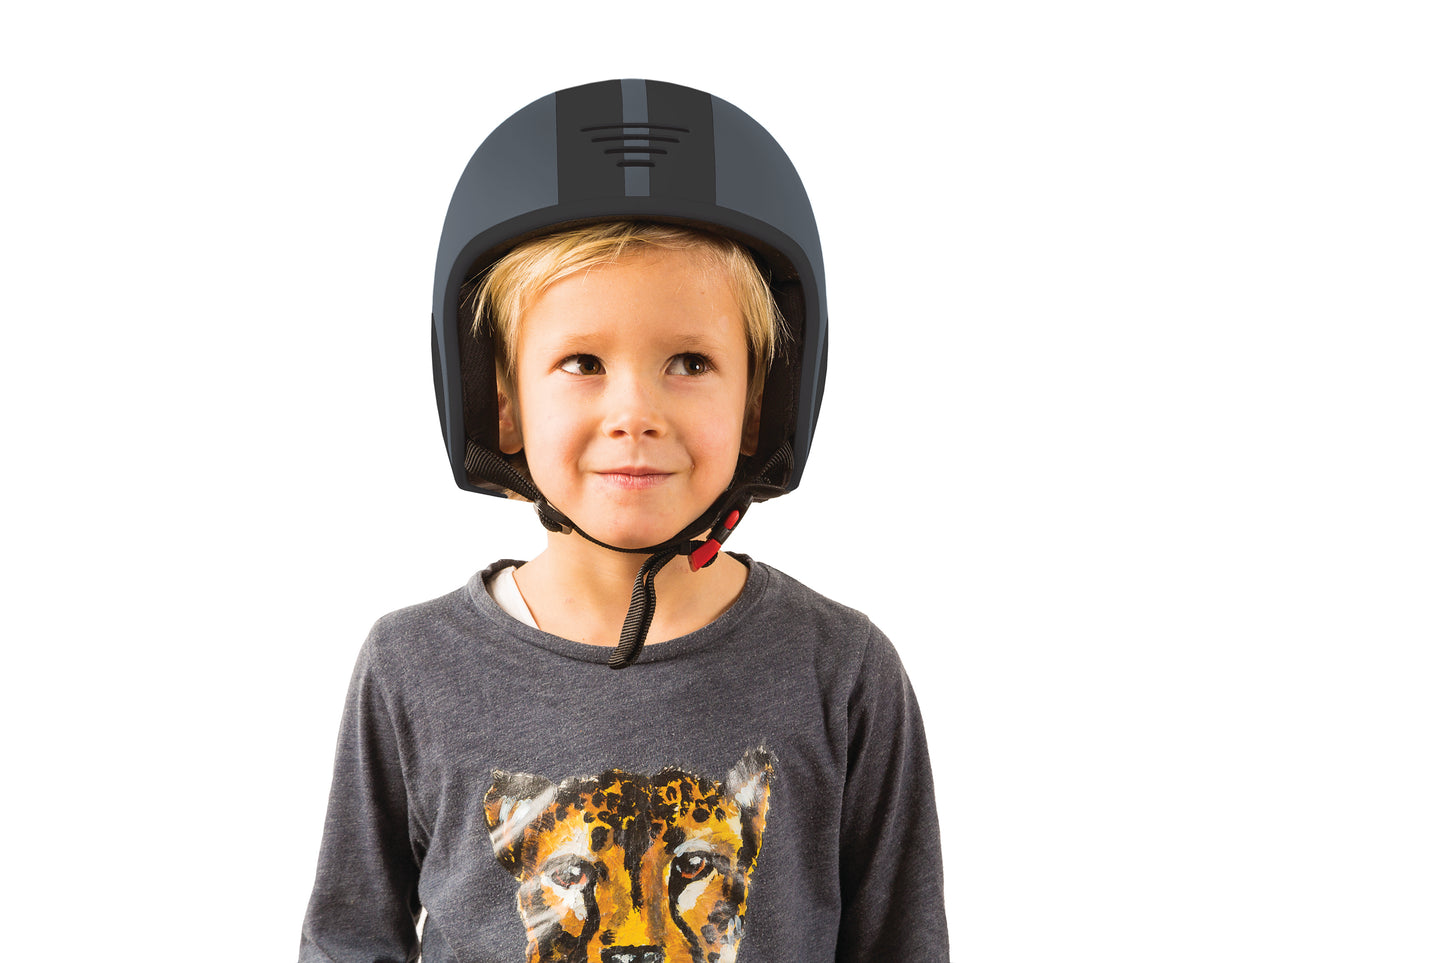 Bobbi - helmet with adjuster -  XS and S size